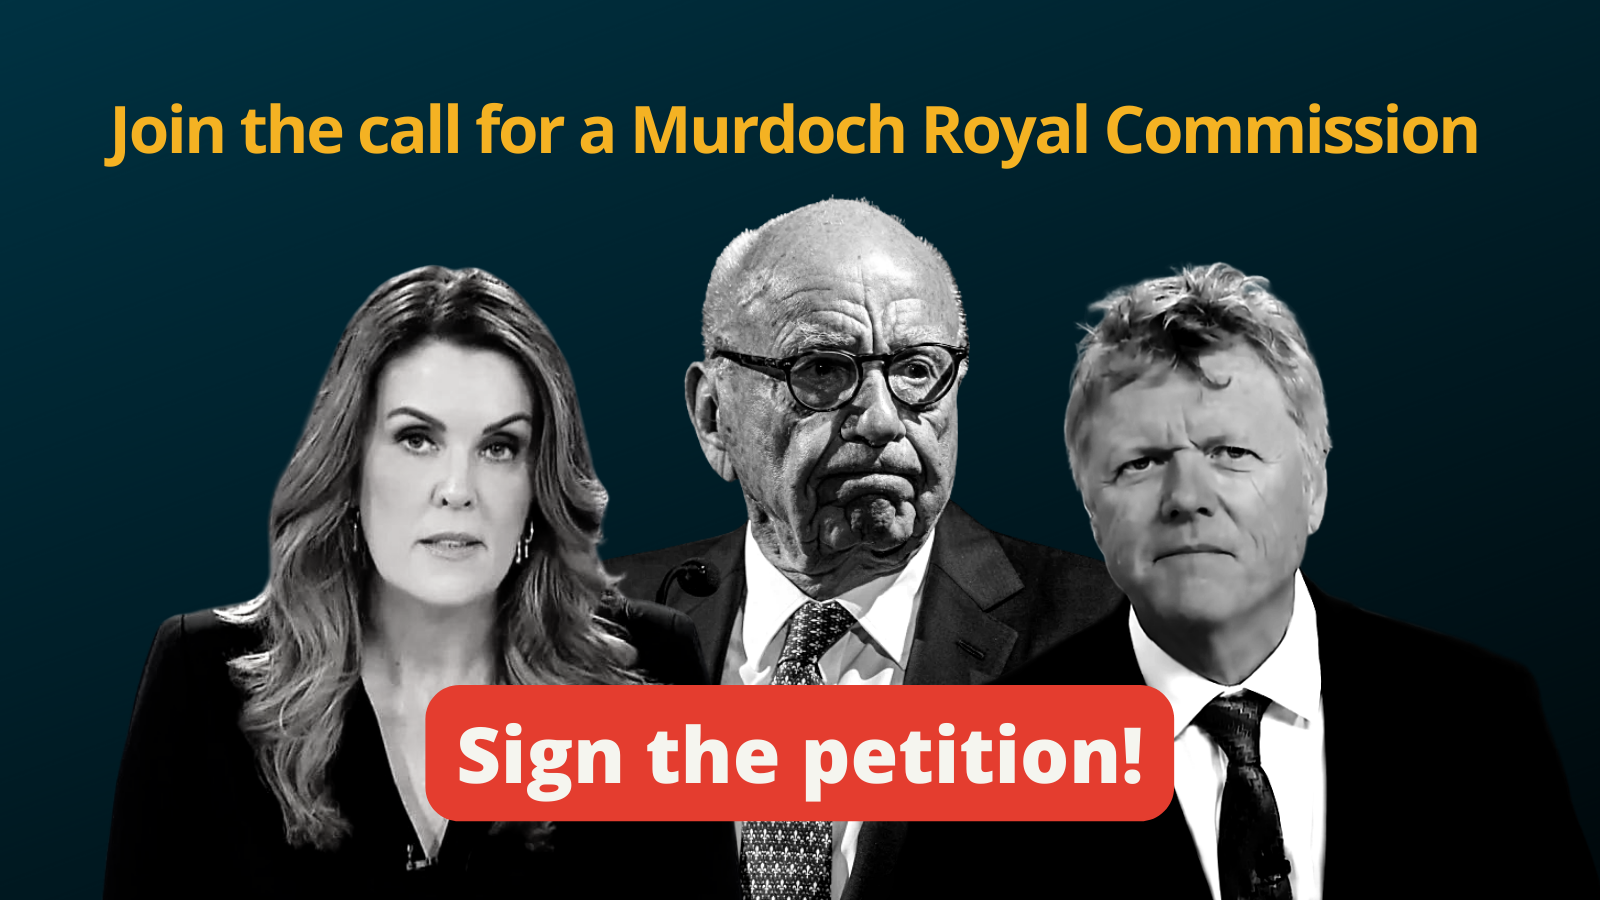 Black and white photo of Peta Credlin, Rupert Murdoch and Andrew Bolt with text "Join the call for a Murdoch Royal Commission. Sign the Petition!"